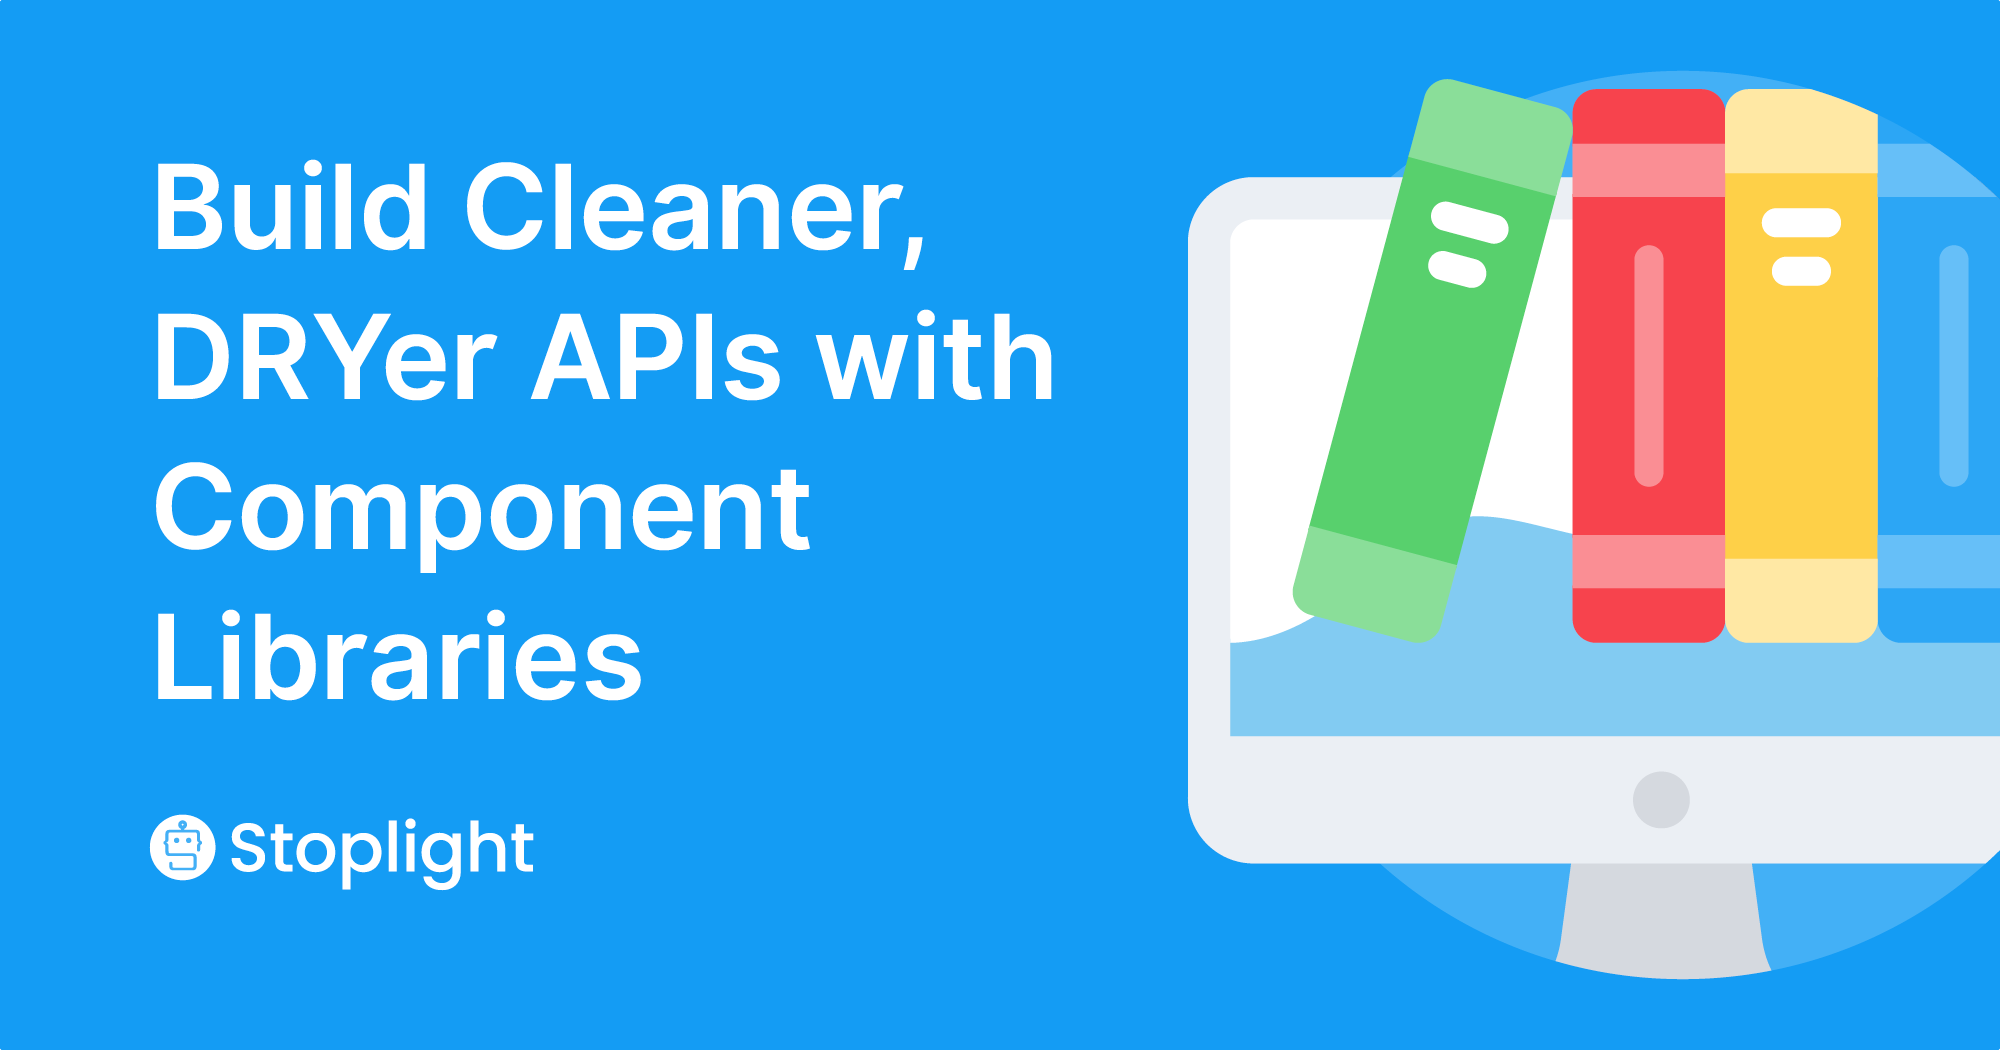 Build Cleaner, DRYer APIs with Component Libraries